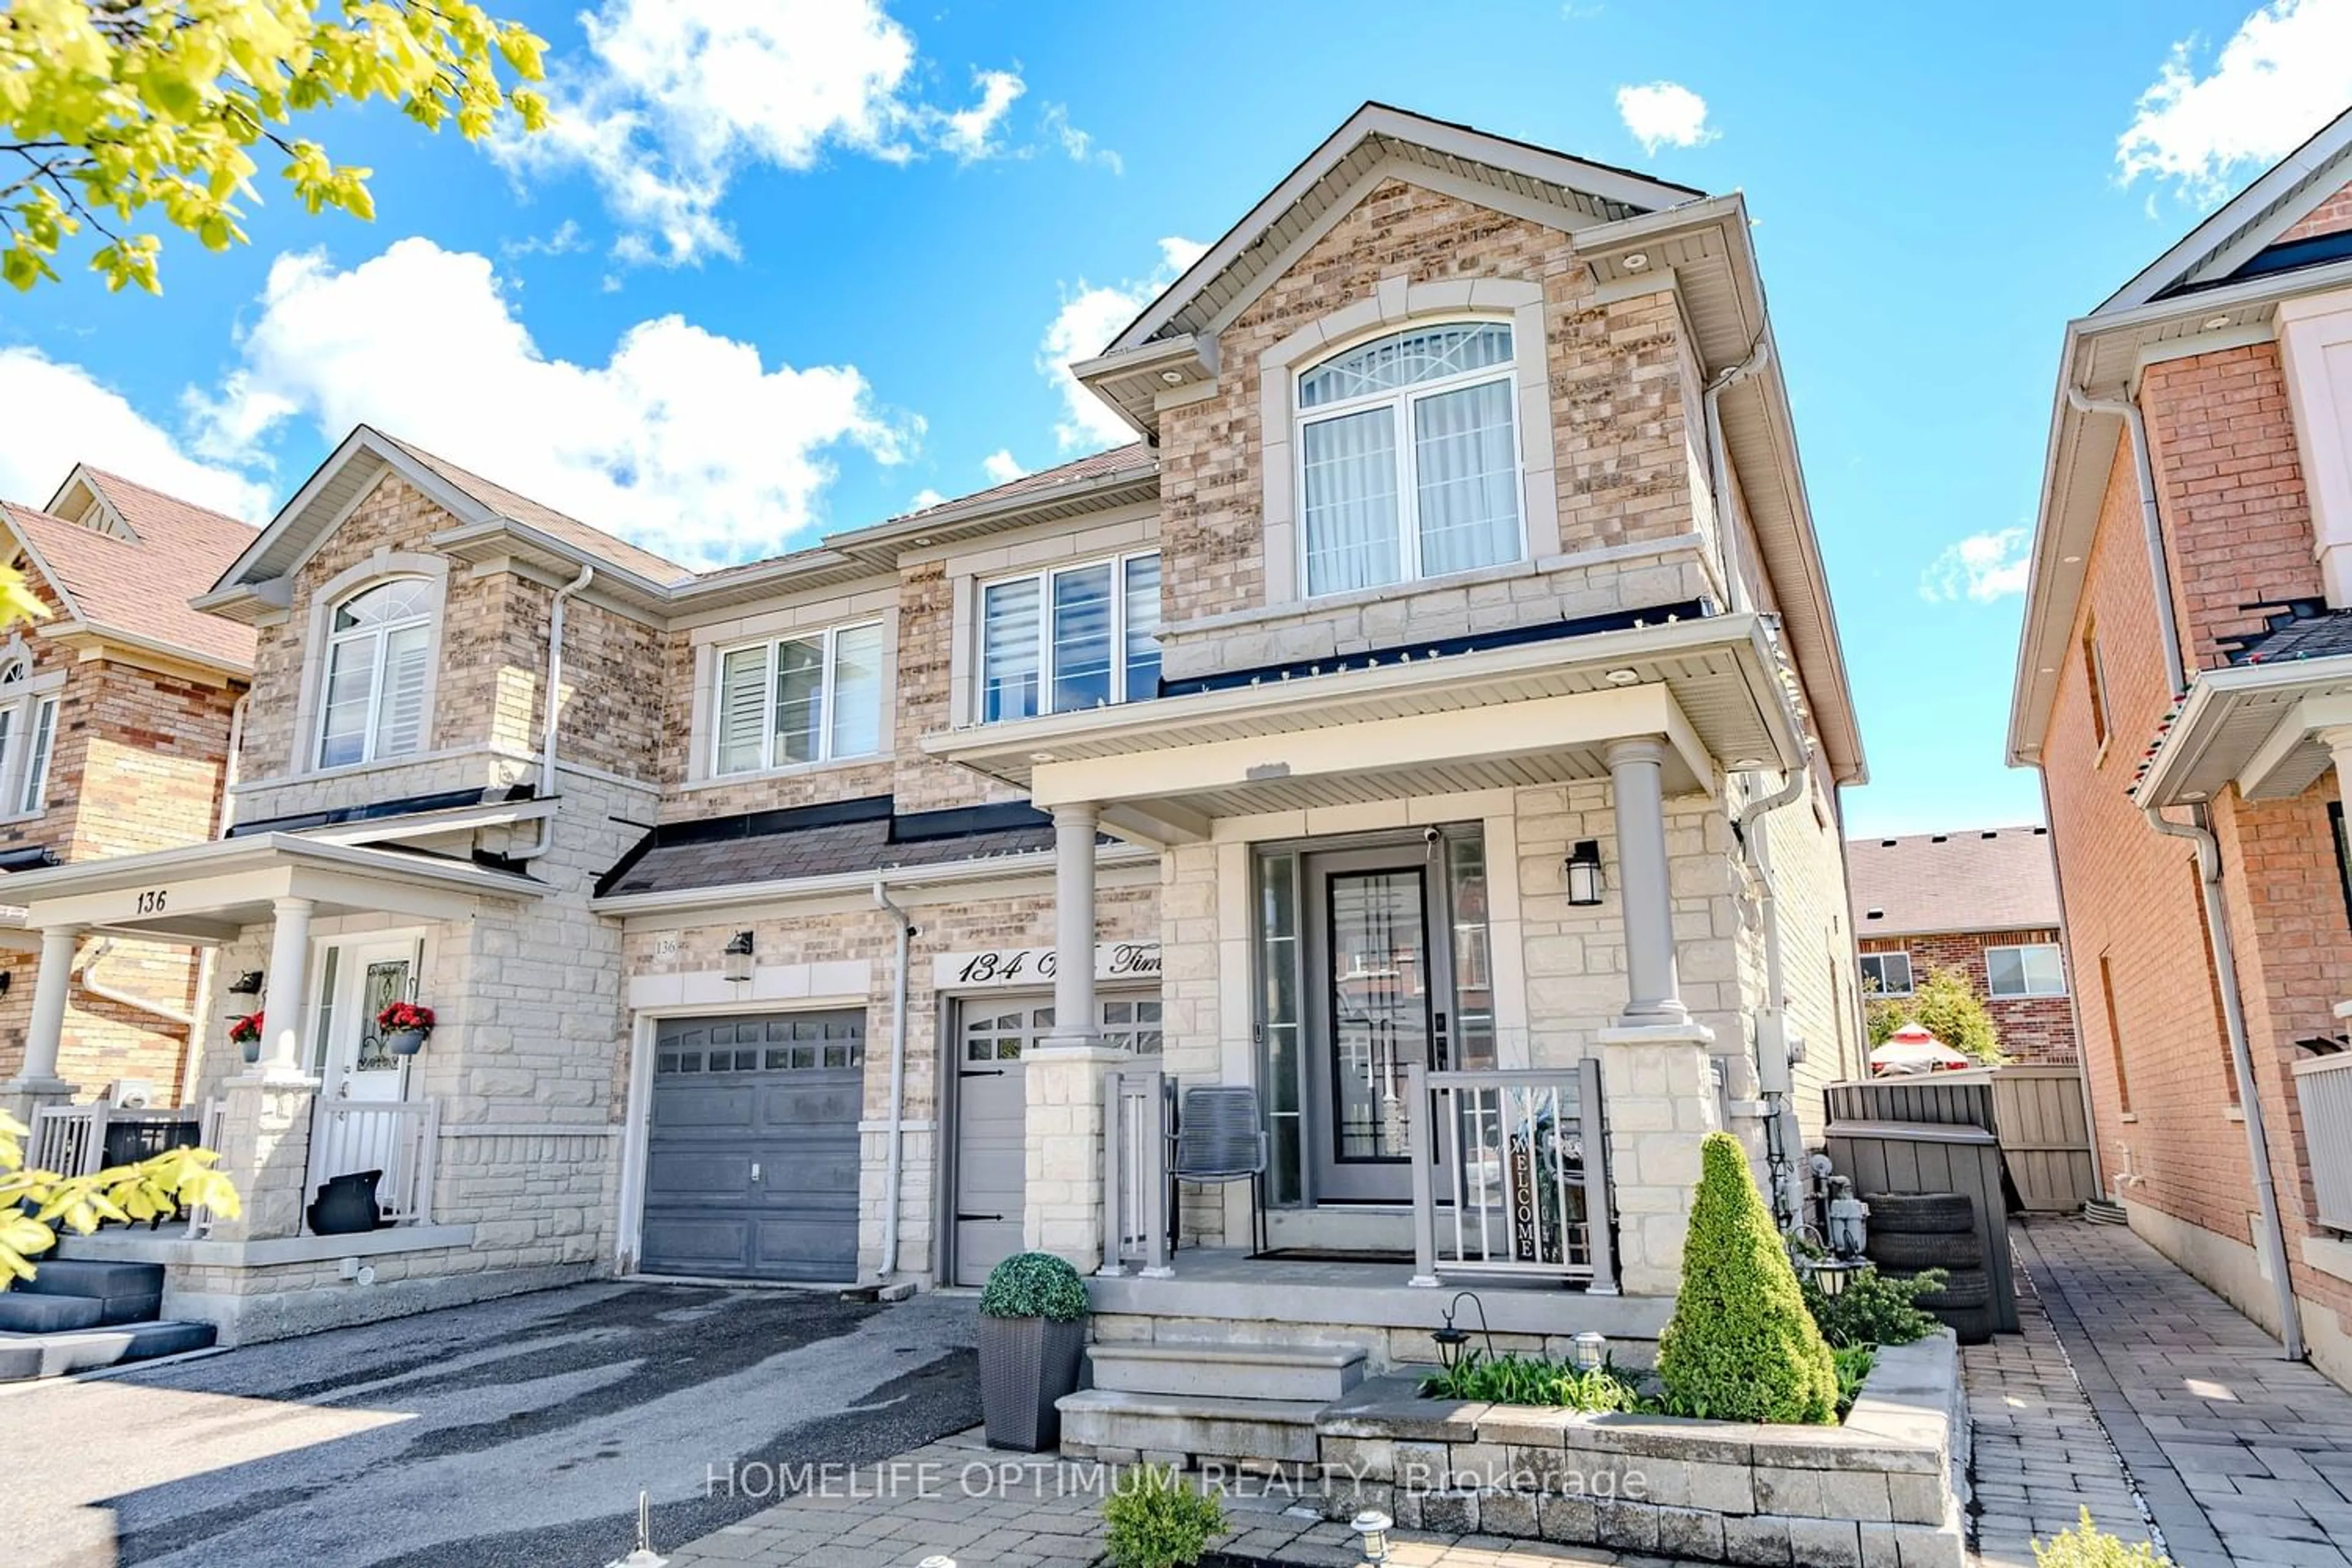 Home with brick exterior material for 134 Win Timbers Cres, Whitchurch-Stouffville Ontario L4A 0Z1